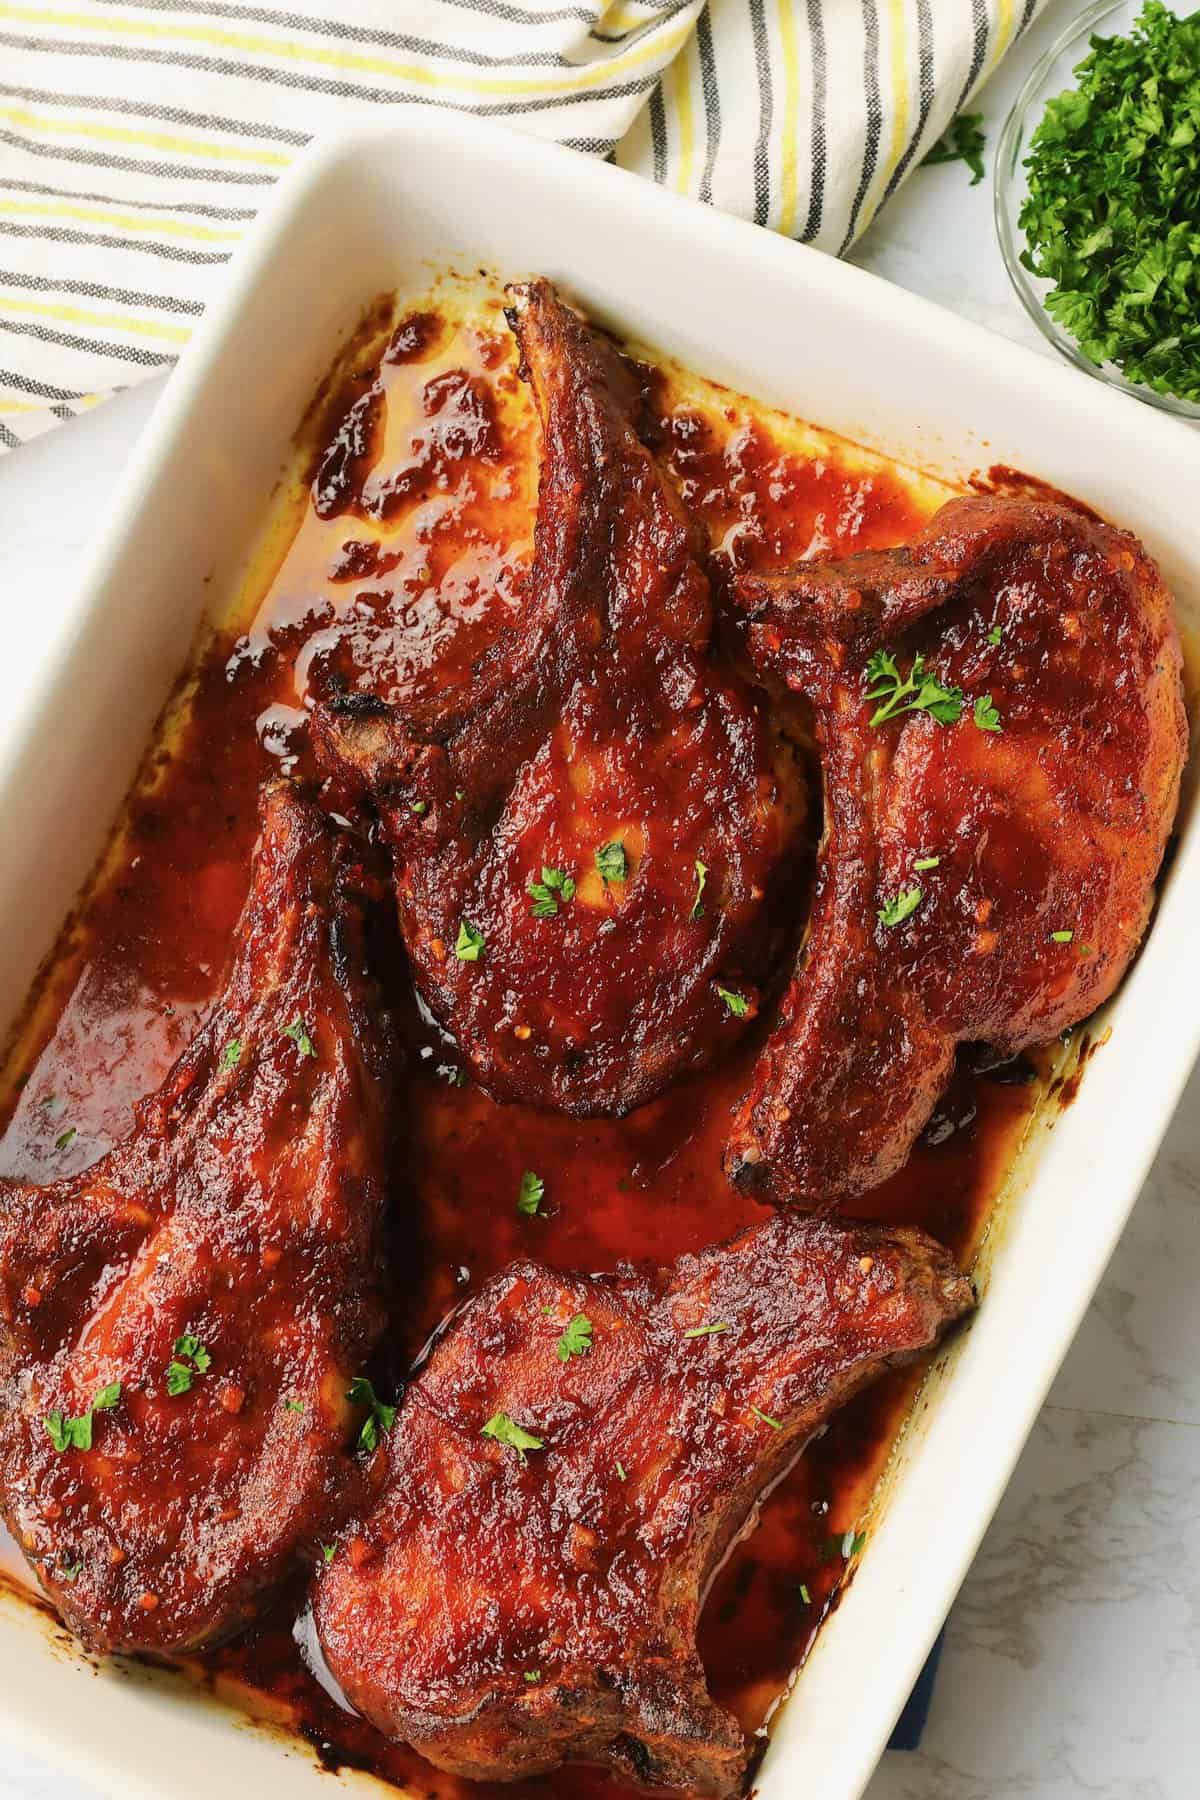 An insanely delicious platter of Oven BBQ Pork Chops fresh from the oven